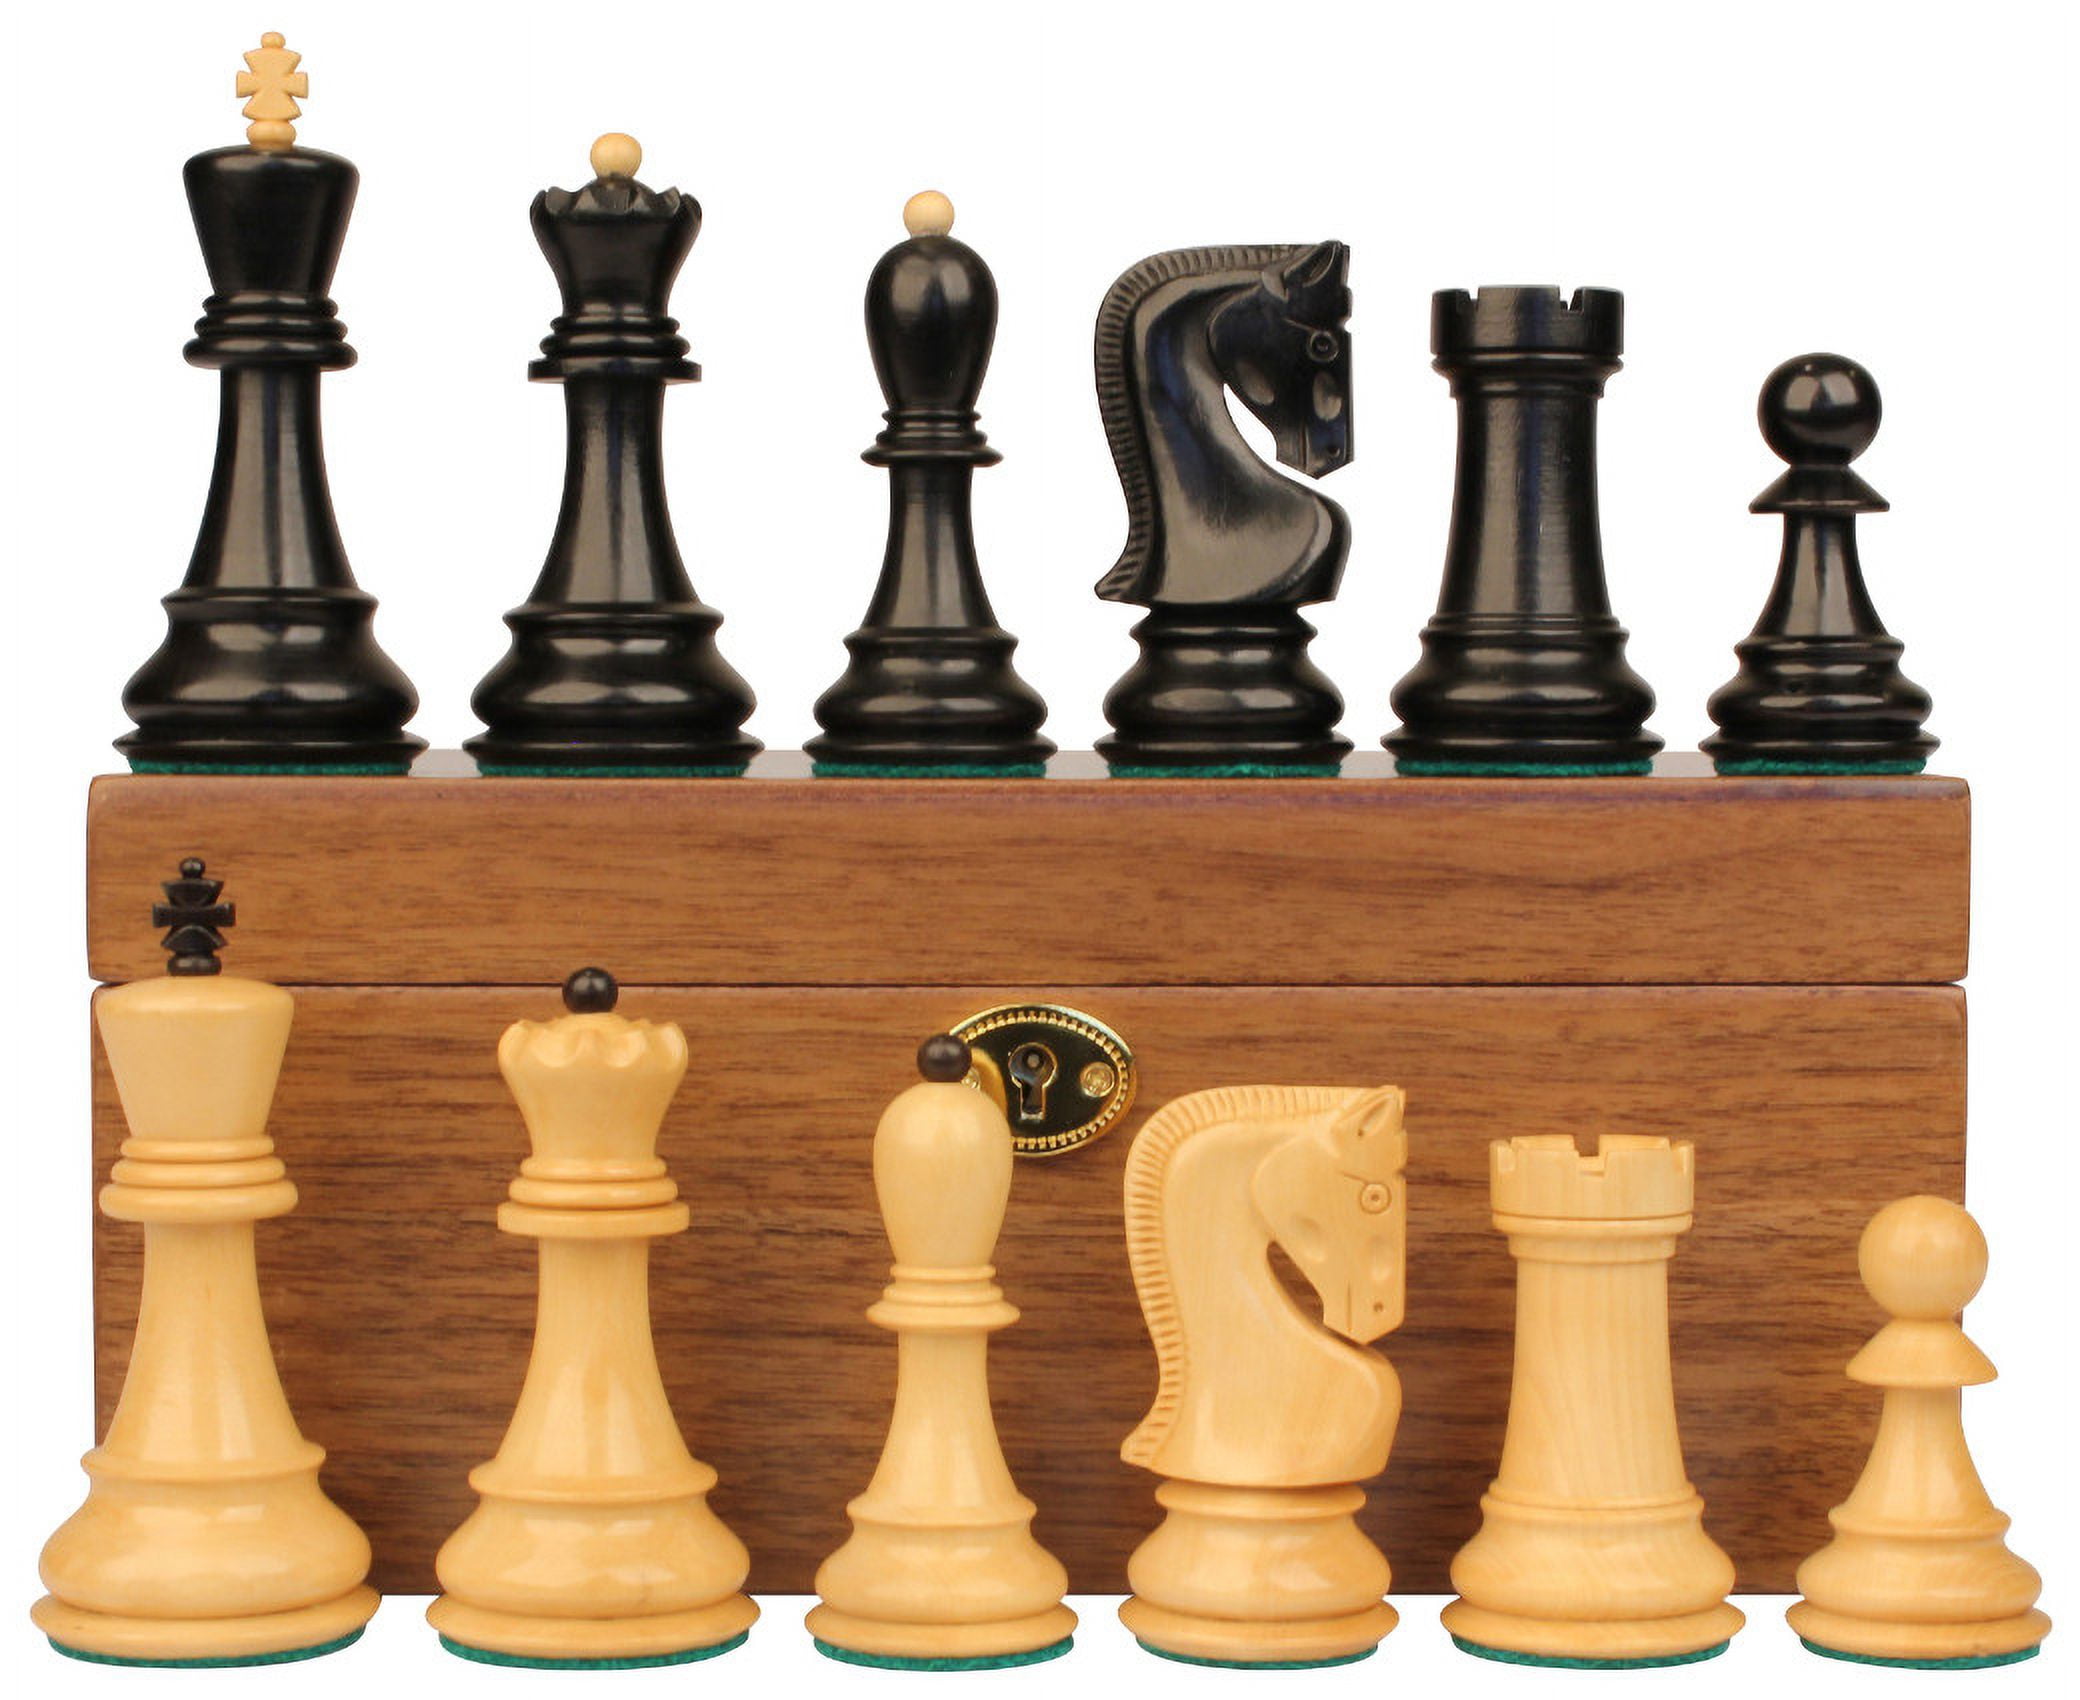 Fischer-Spassky Commemorative Chess Set with Ebony & Boxwood Pieces - 3.75  King - The Chess Store